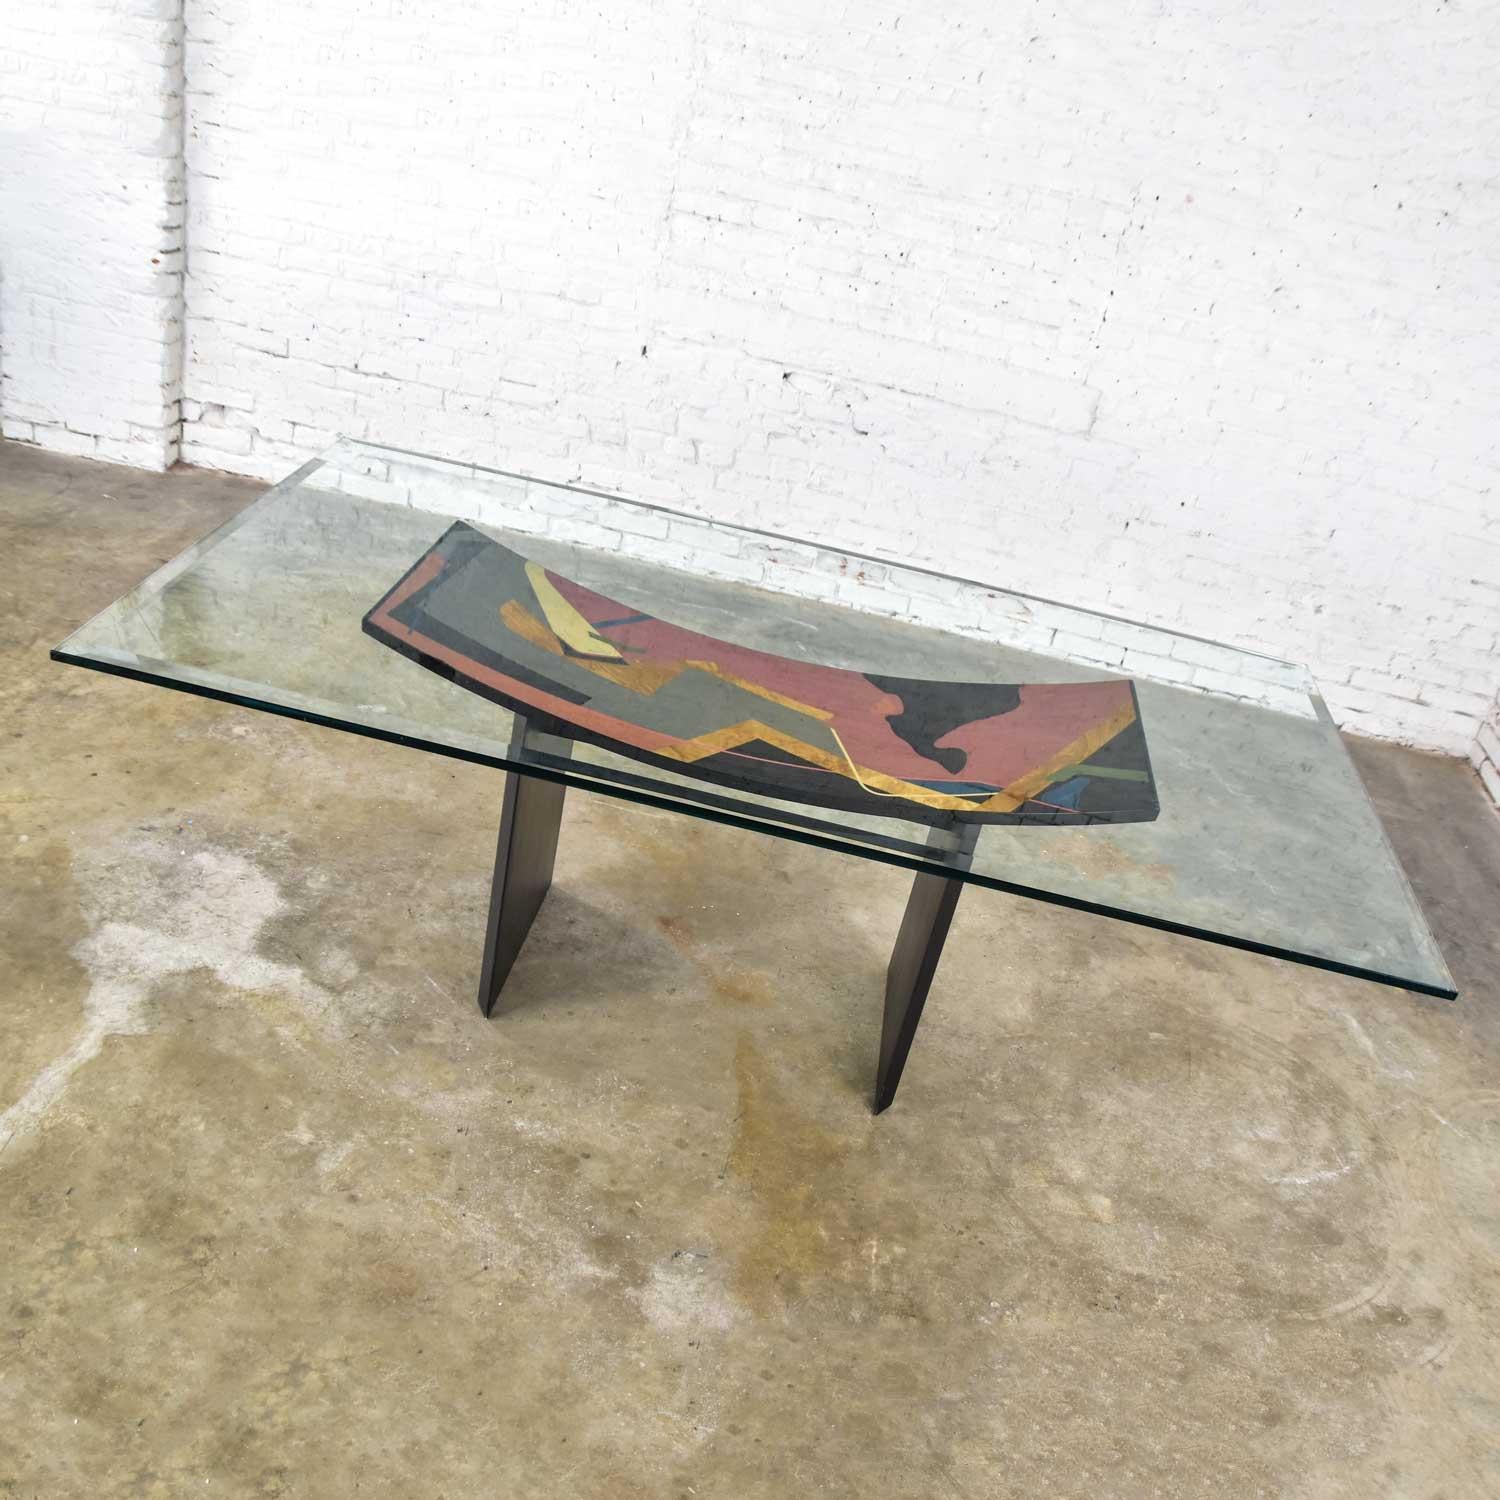 Magnificent Italian Postmodern style dining table signed by Pietro Costantini. Comprised of a concave curved rectangle base on two straight panels. Highly black lacquered on the legs and one side of the base top and the top side has a veneer inlay